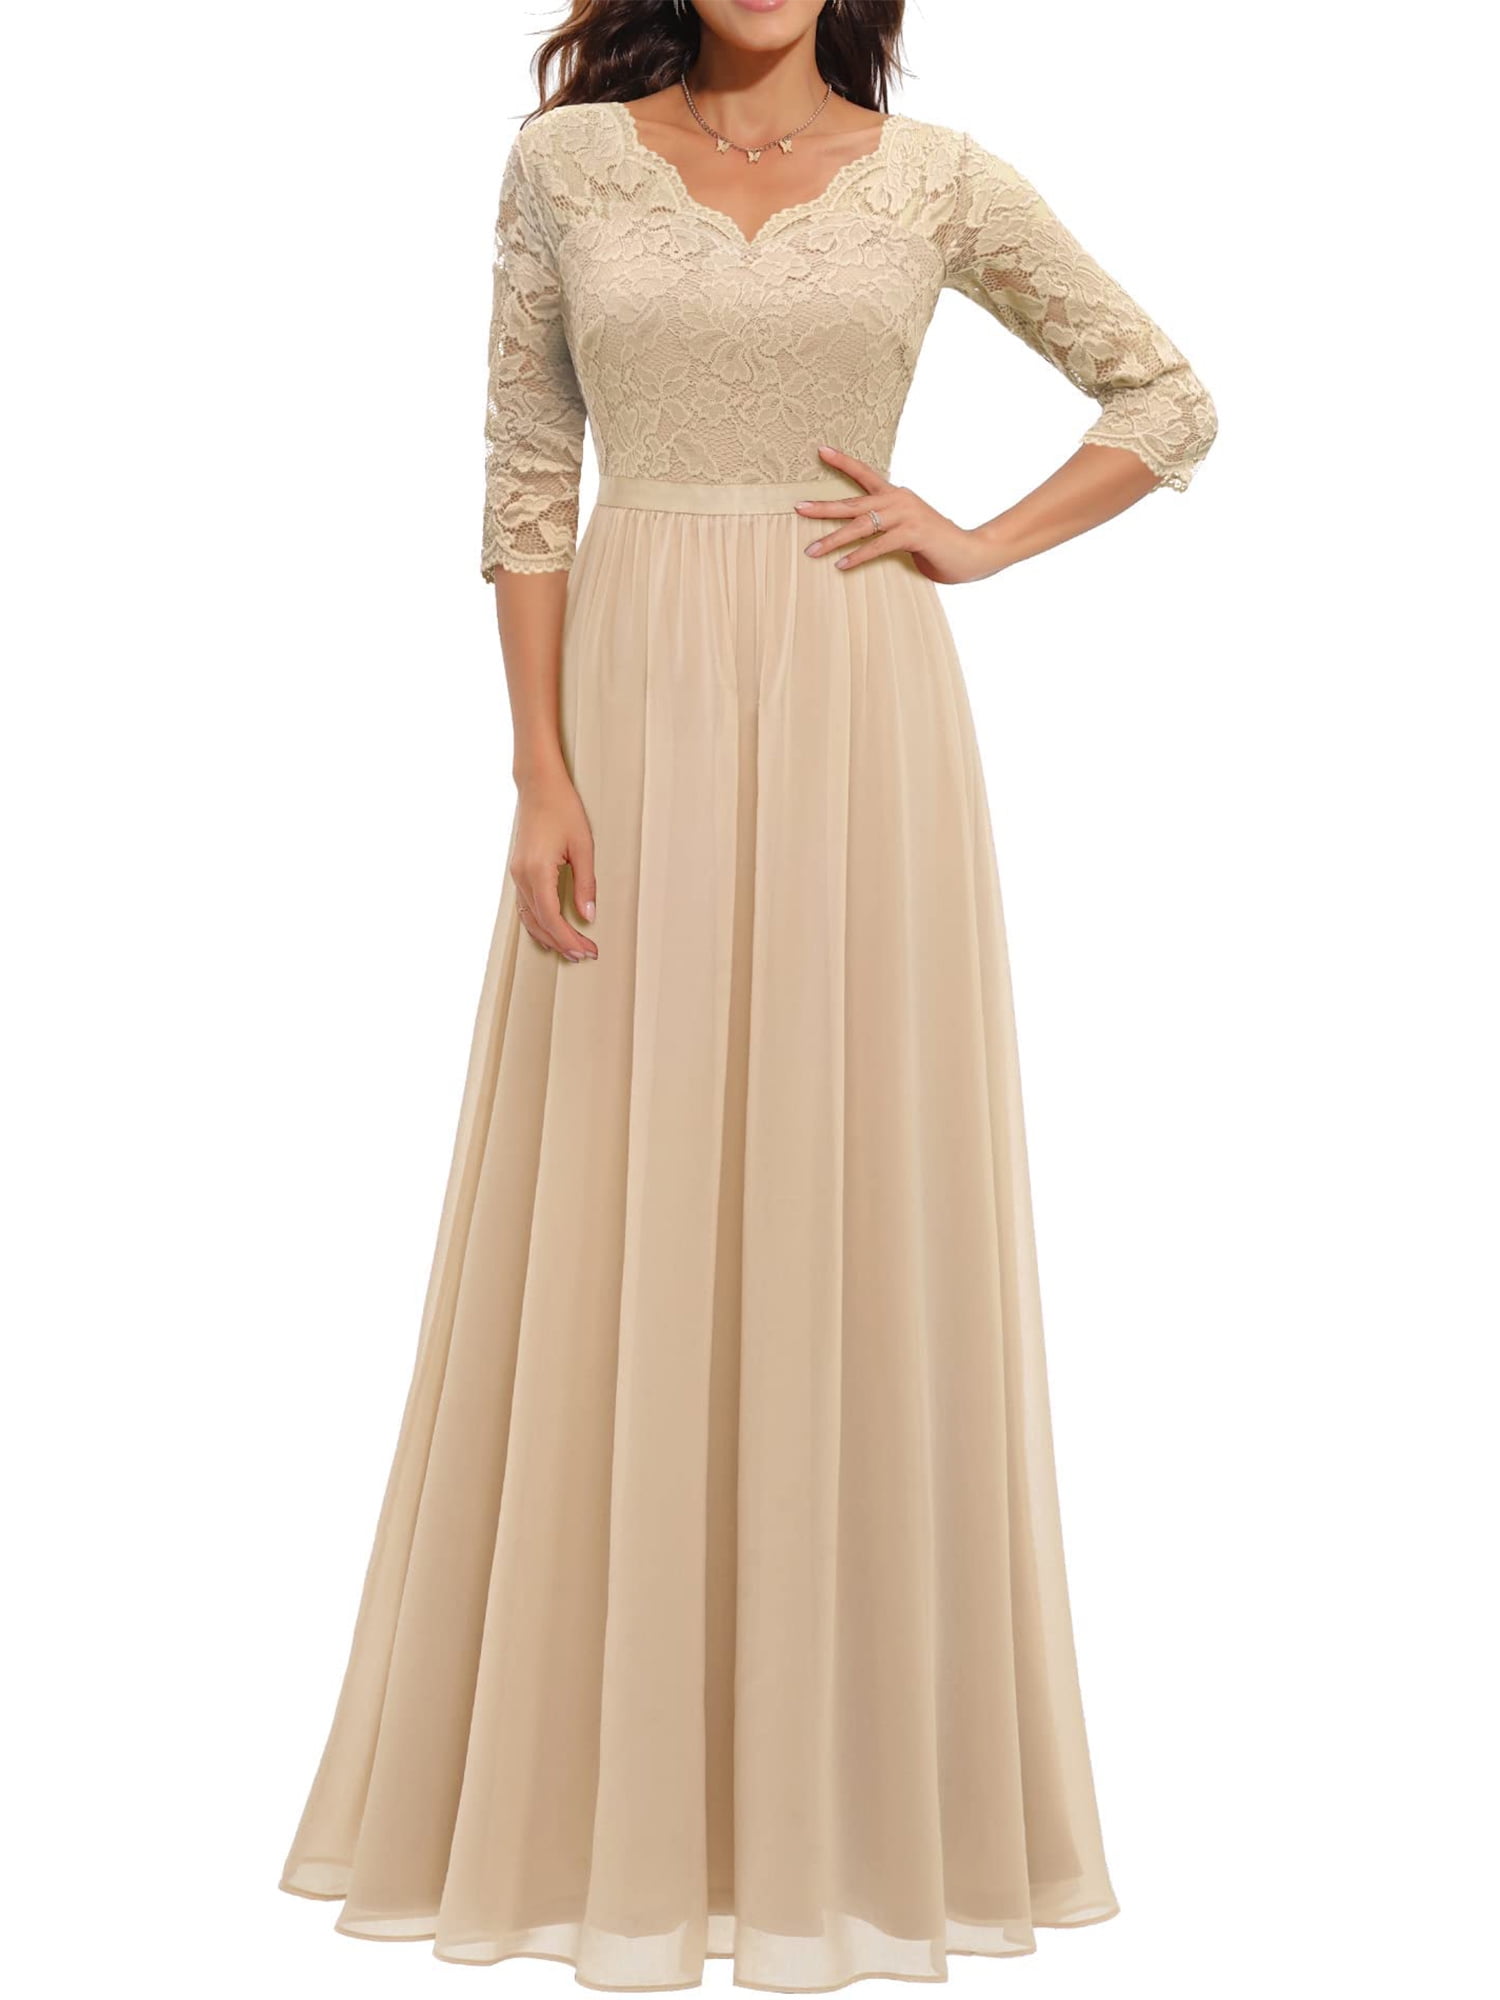 TeresaCollections - Simple High Low Evening Half Sleeves Lace Prom Dress